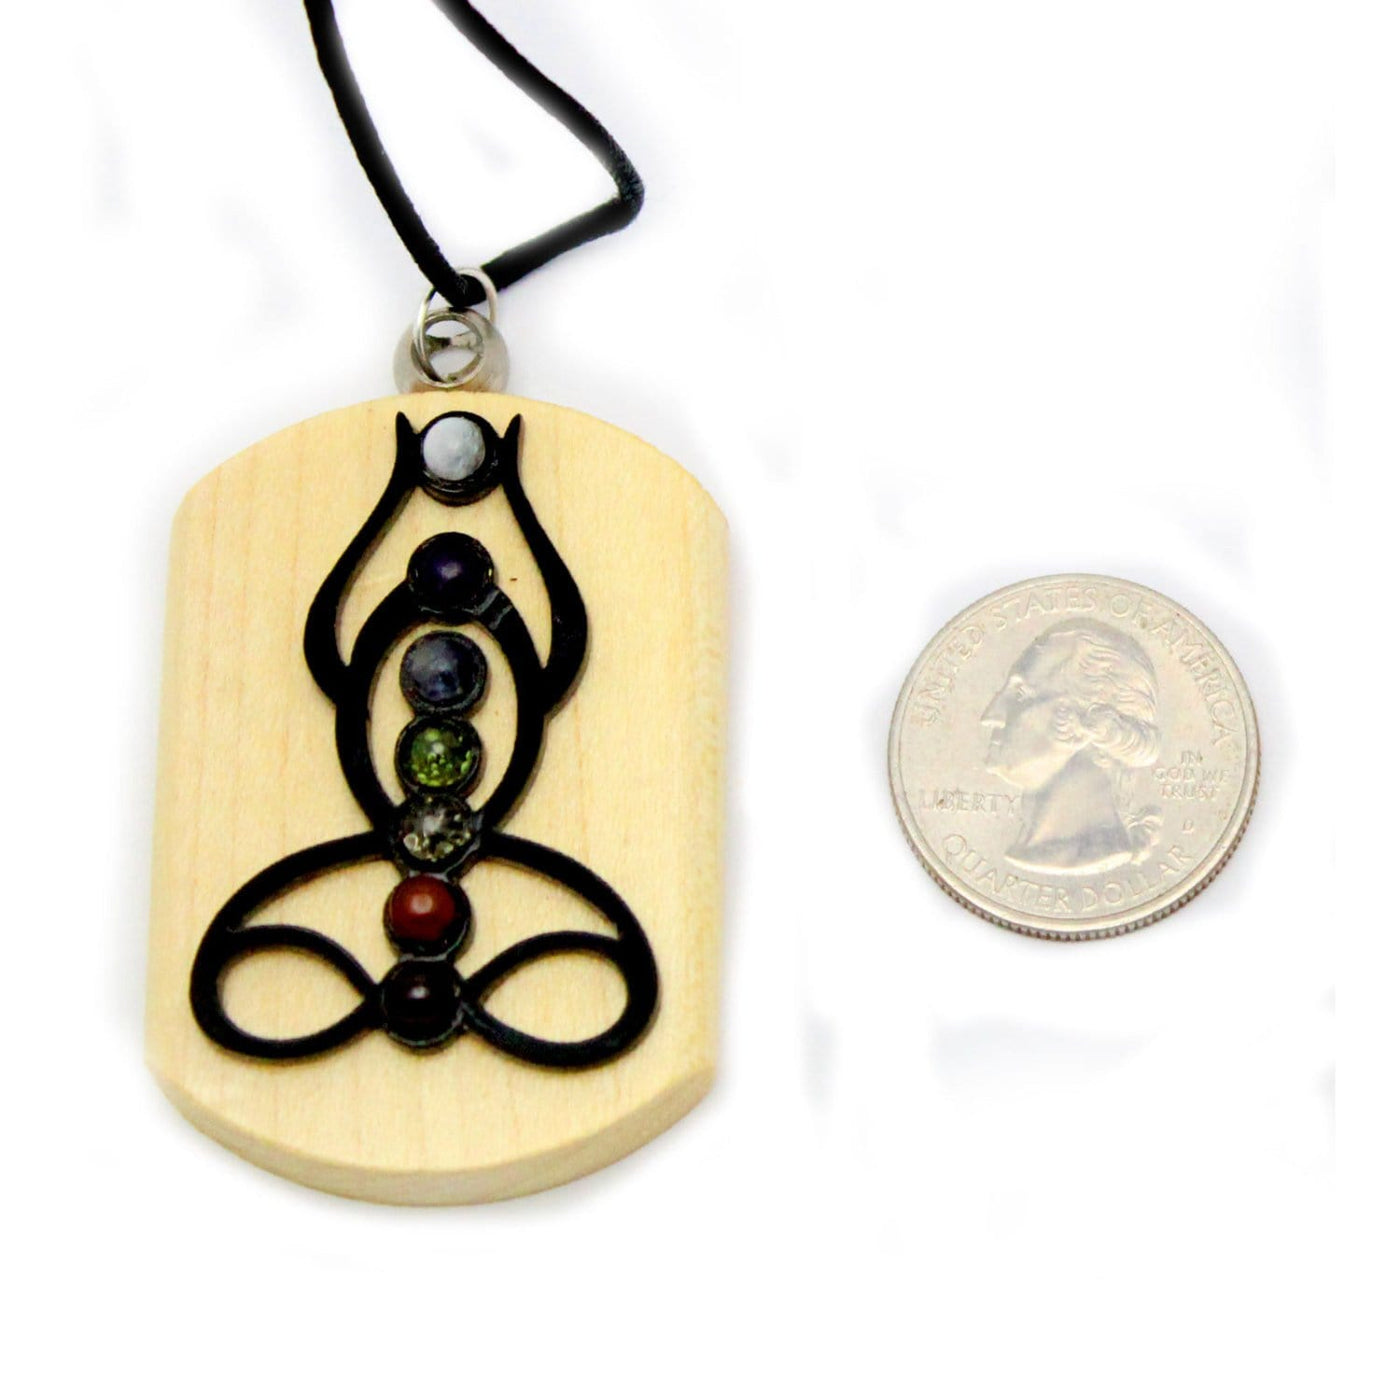 seven chakra buddha pendant with quarter for size reference